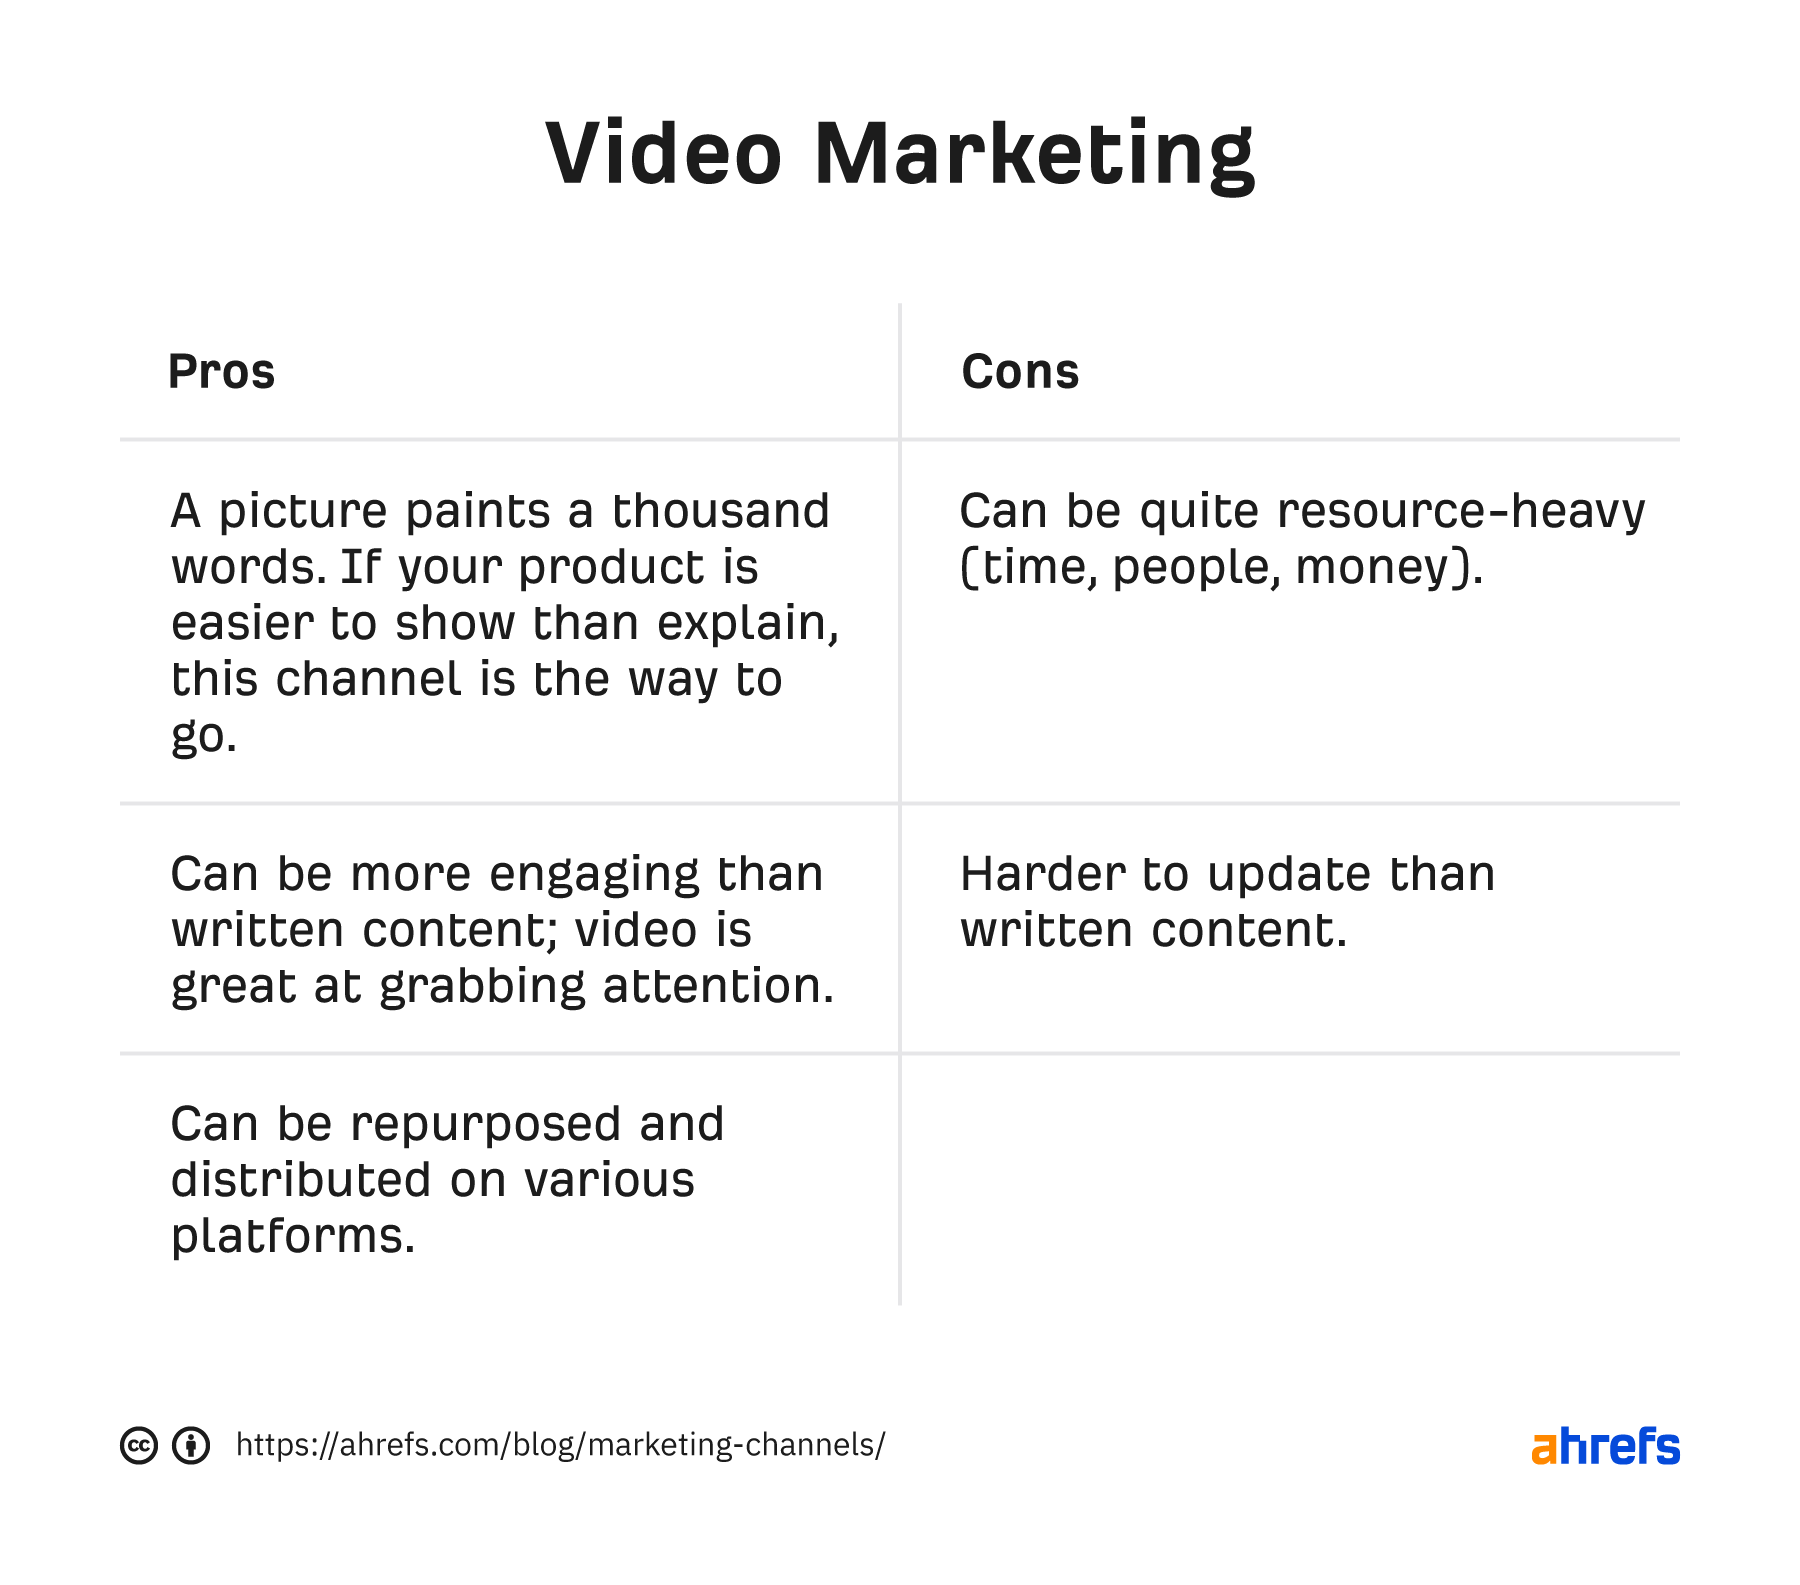 Pros and cons of video marketing